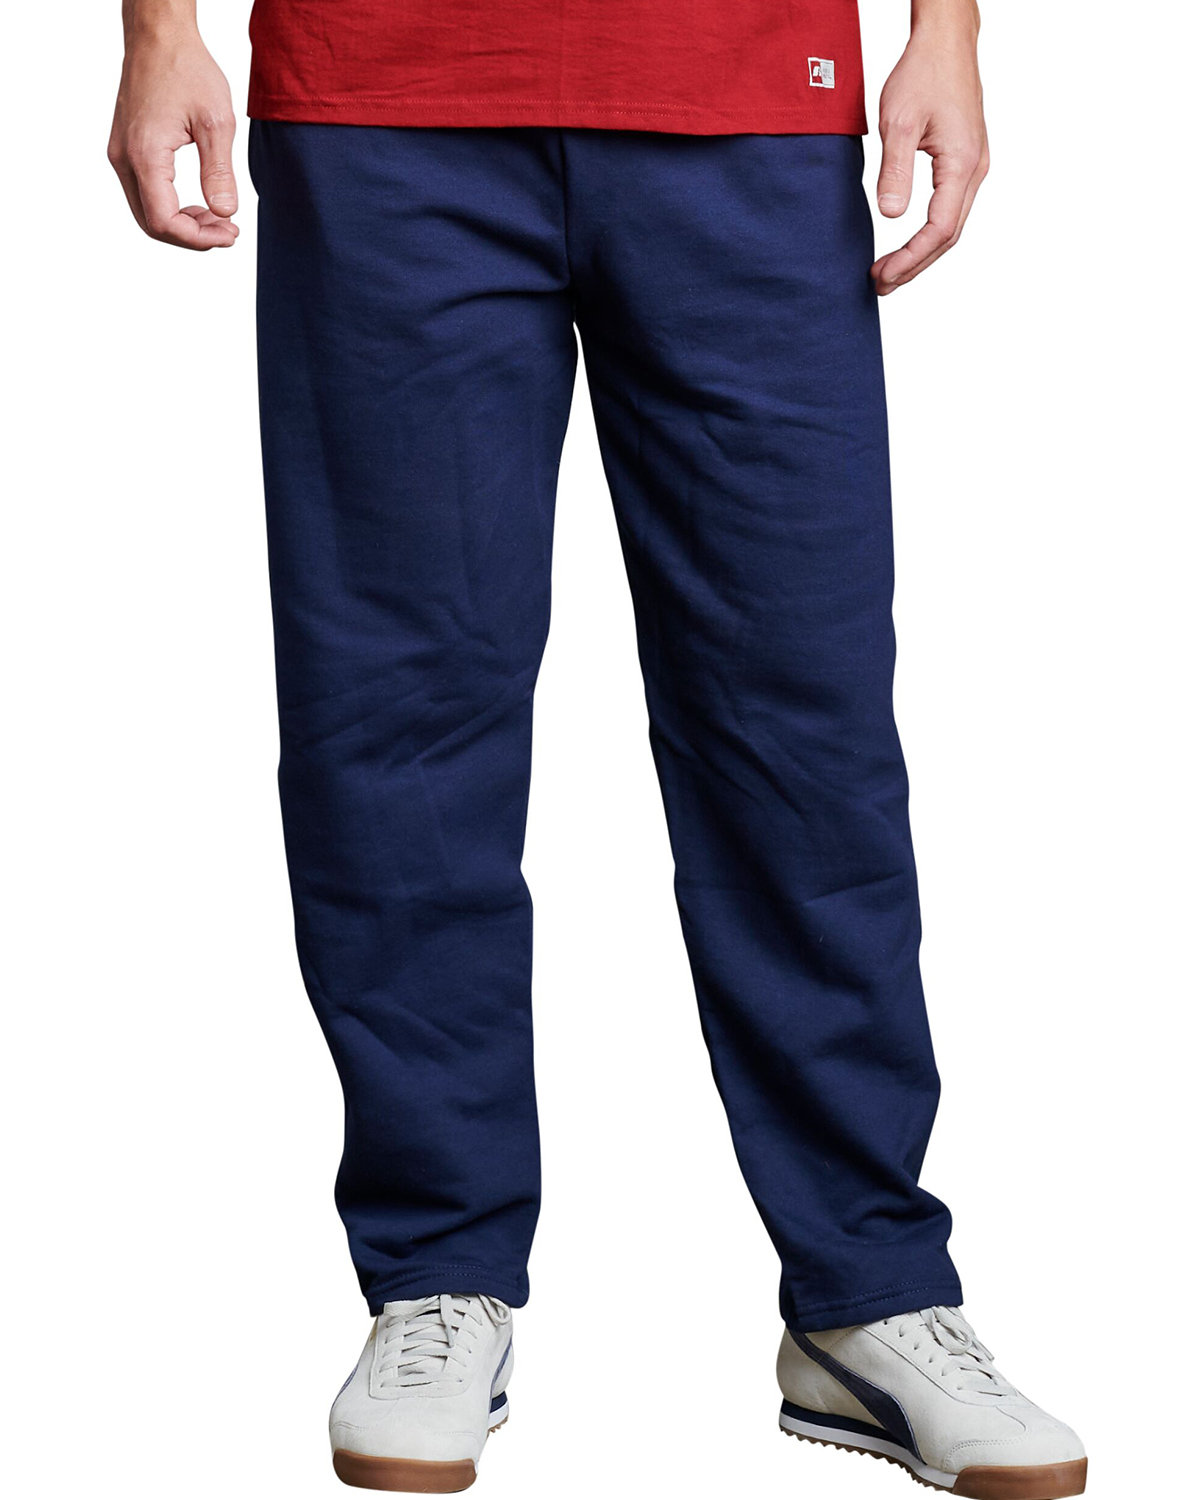 Promotional Russell Athletic Cotton Rich Open Bottom Sweatpants - Blue Soda  Promo